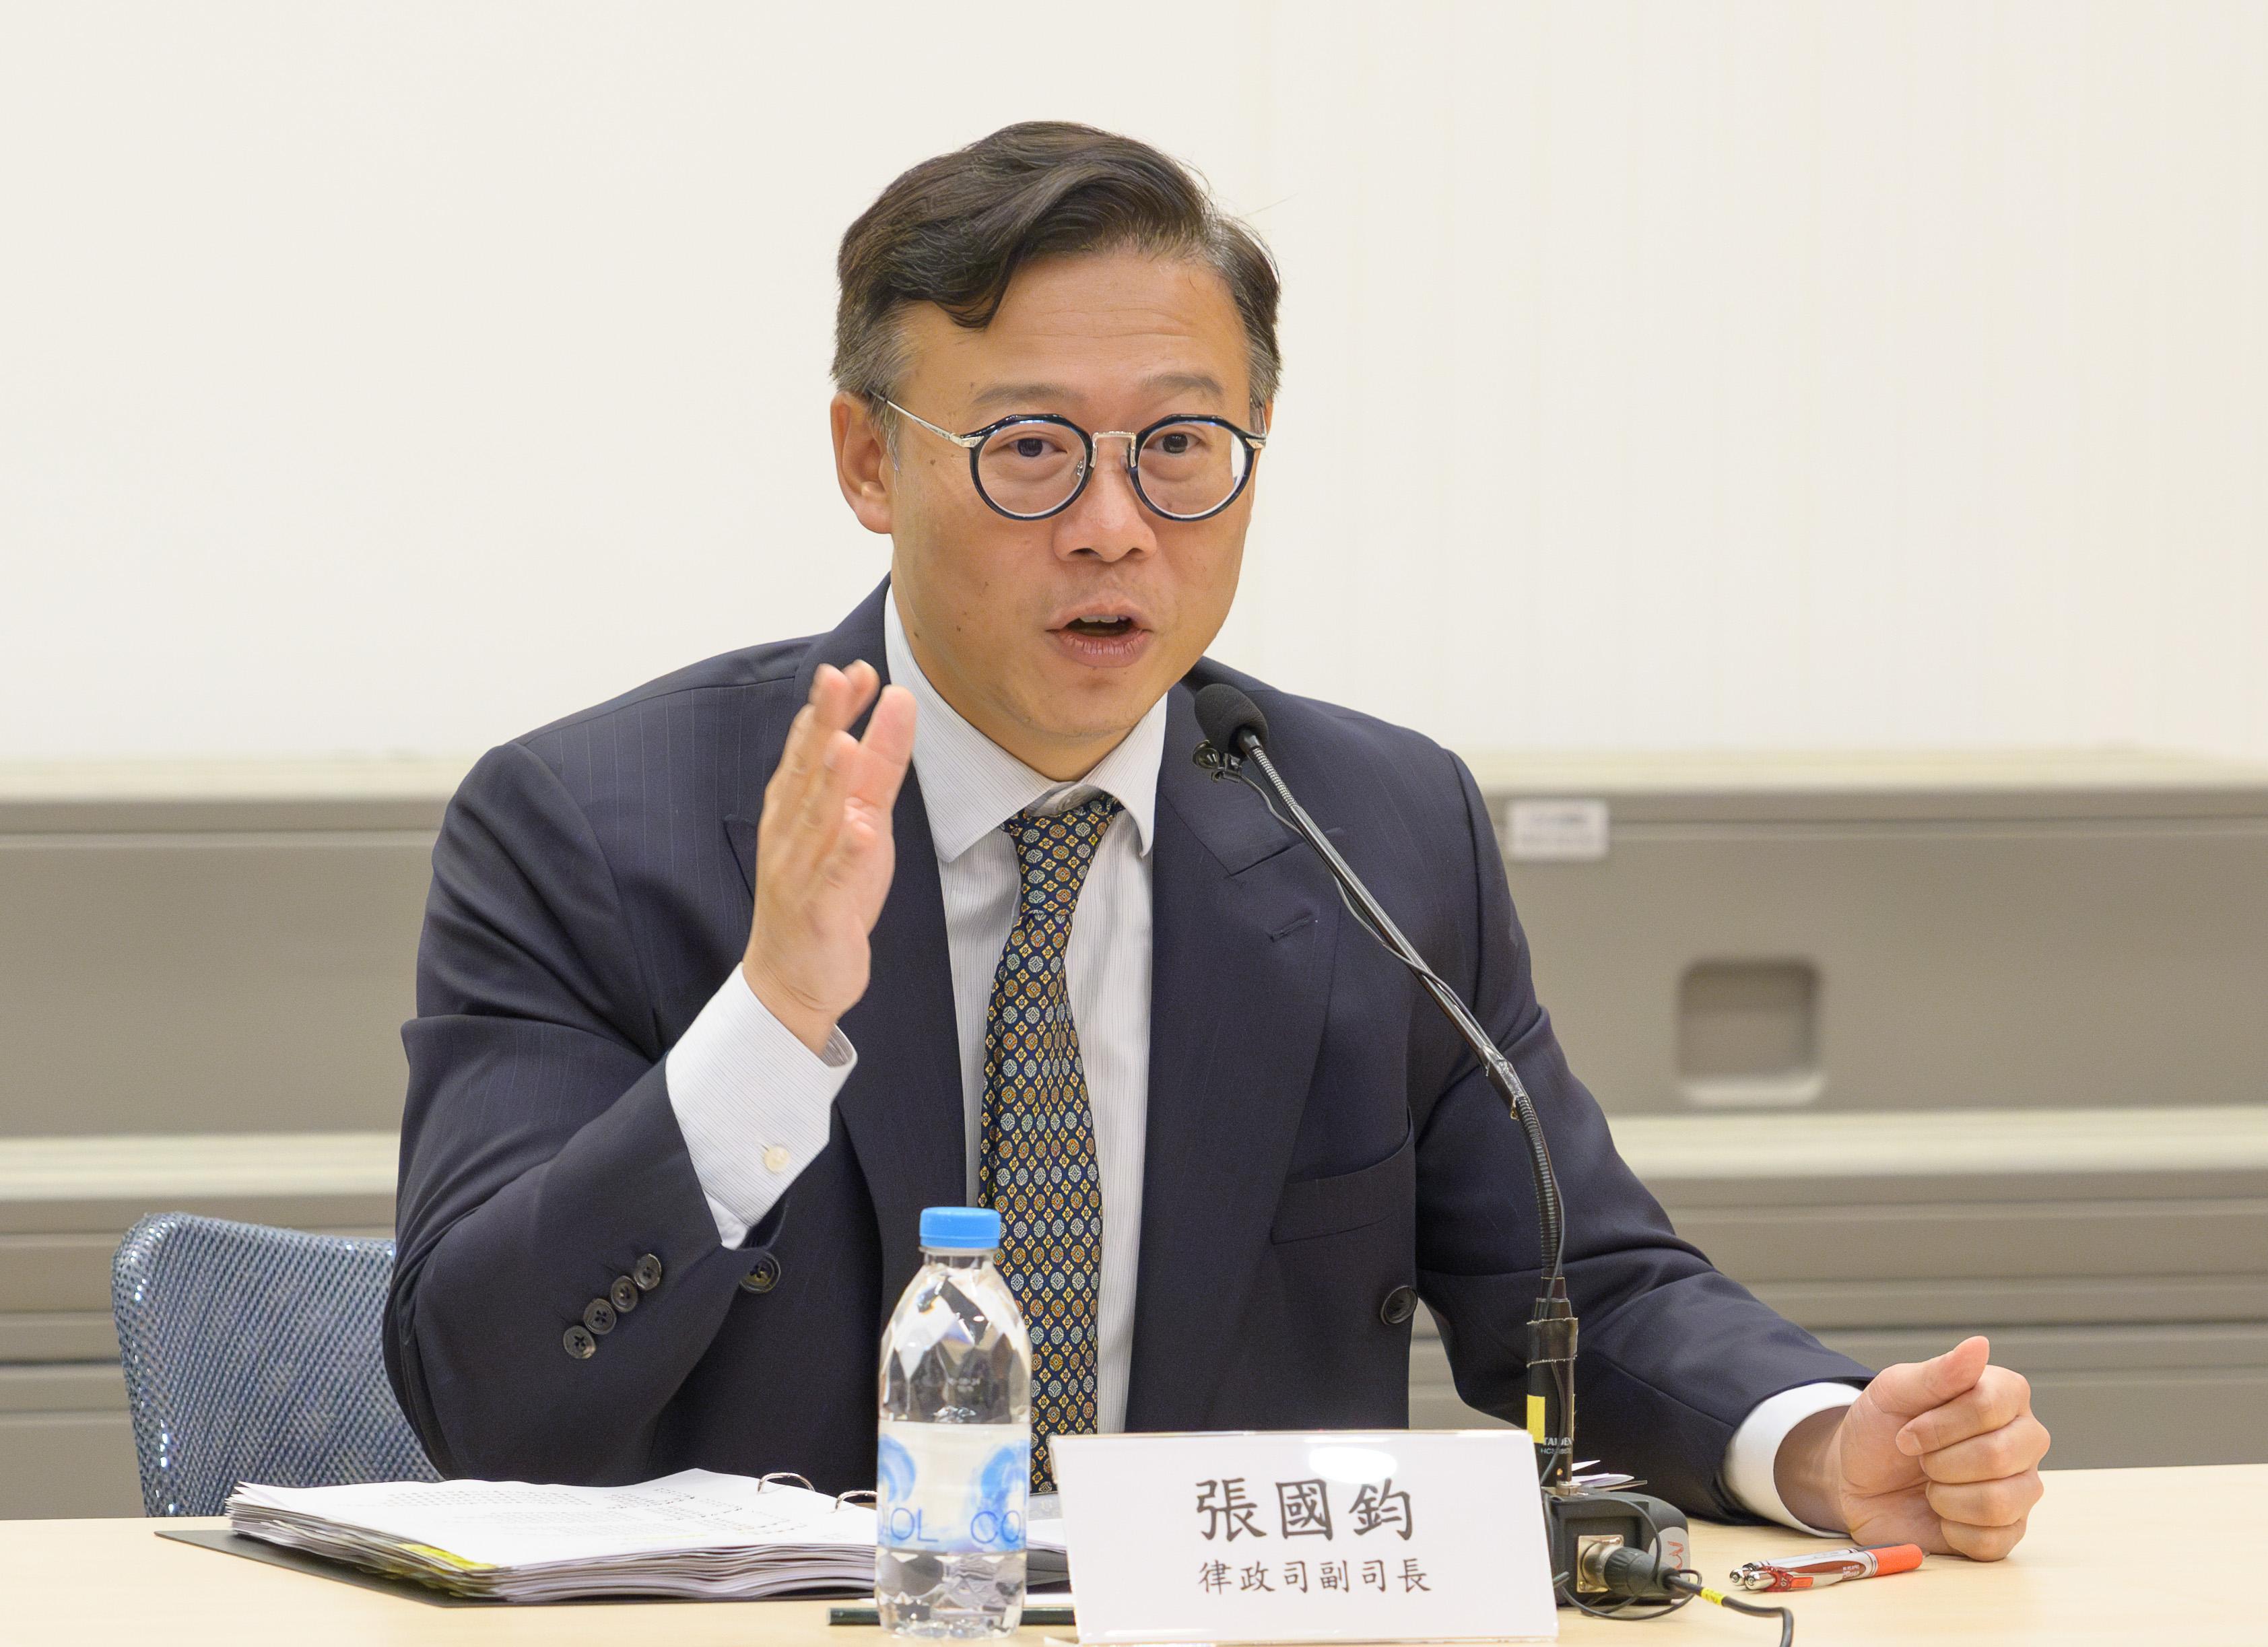 The Deputy Secretary for Justice, Mr Cheung Kwok-kwan, will lead a delegation comprising young representatives of the Law Society of Hong Kong and the Hong Kong Bar Association, young government counsel of the Department of Justice, and law students from the three law schools tomorrow (September 7) on a visit to Huizhou and Shenzhen. Photo shows Mr Cheung speaking at the pre-trip briefing.